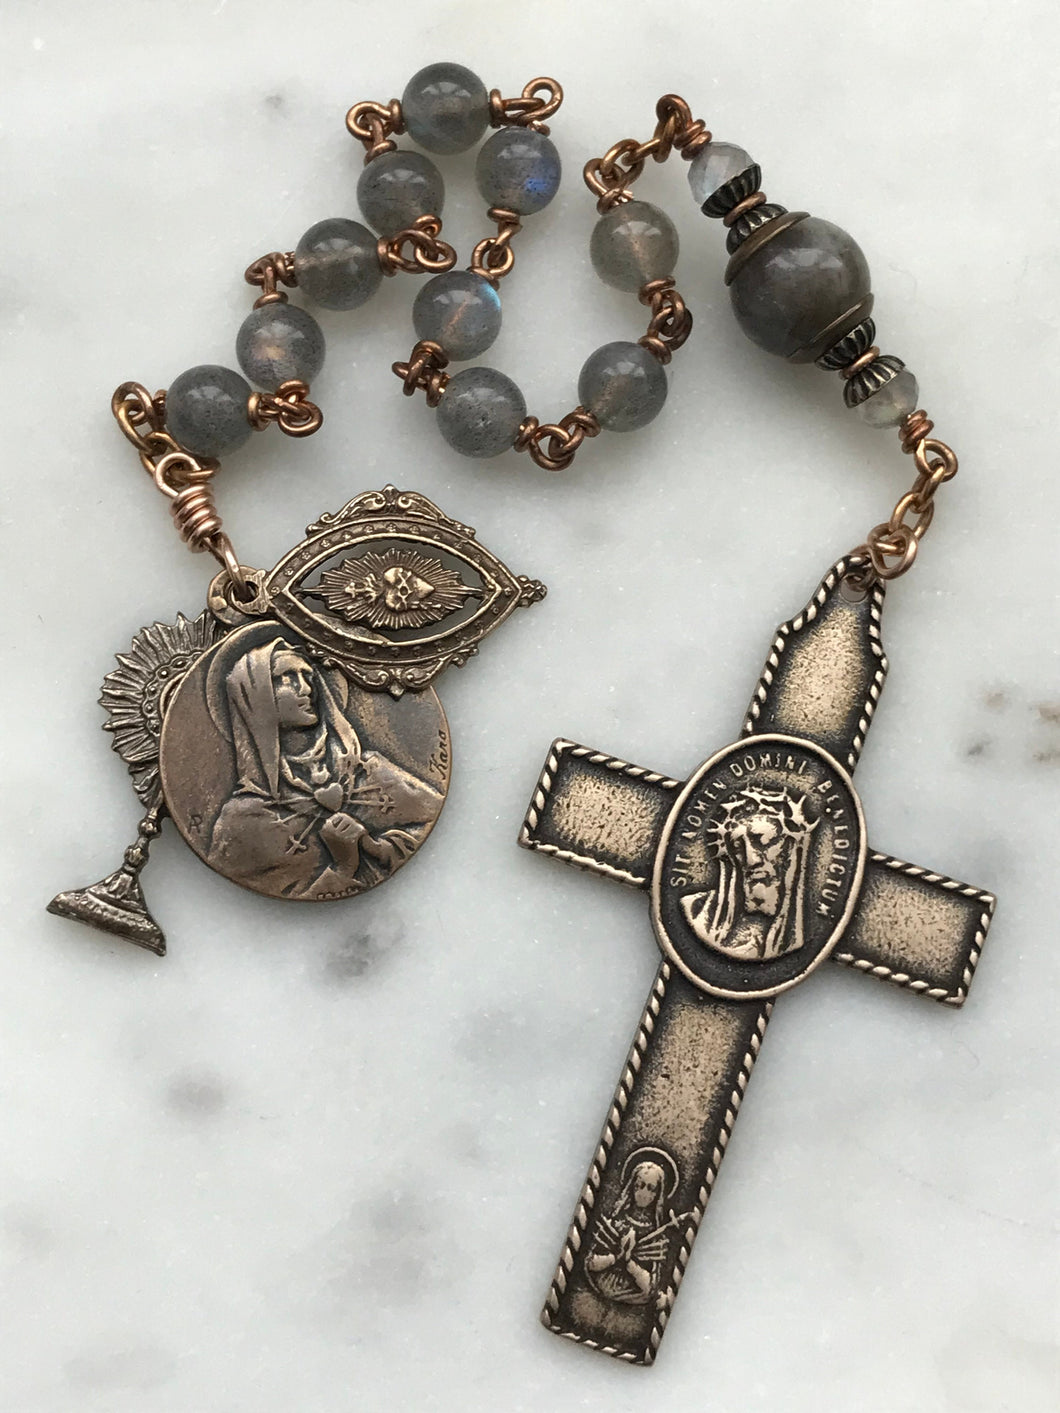 Passion rosary - Labradorite and Bronze - Eucharist - Adoration - Sacred Heart - Immaculate Heart CeCeAgnes